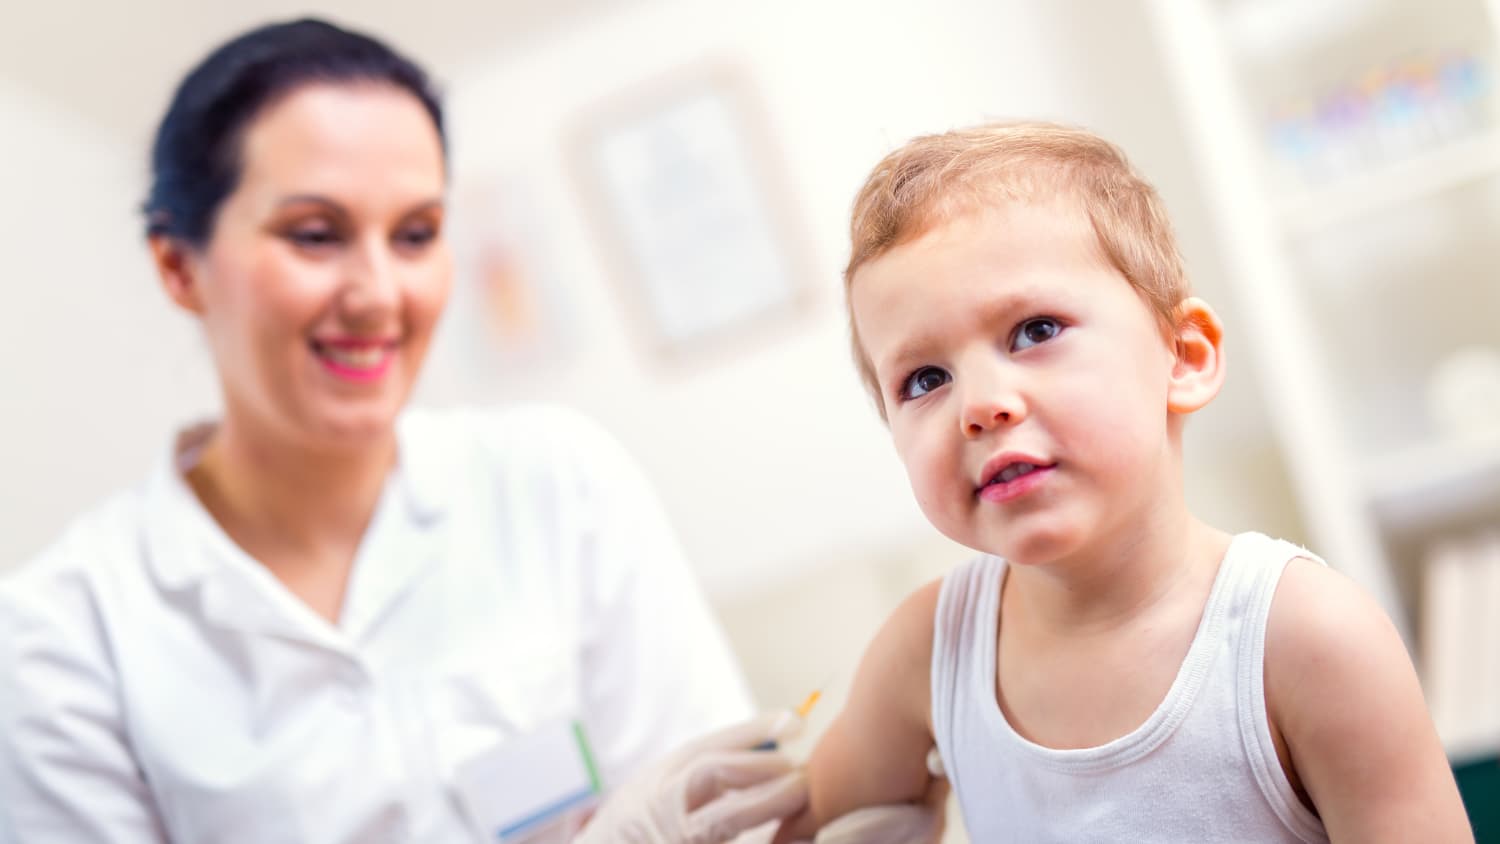 A boy receives his vaccination for measles